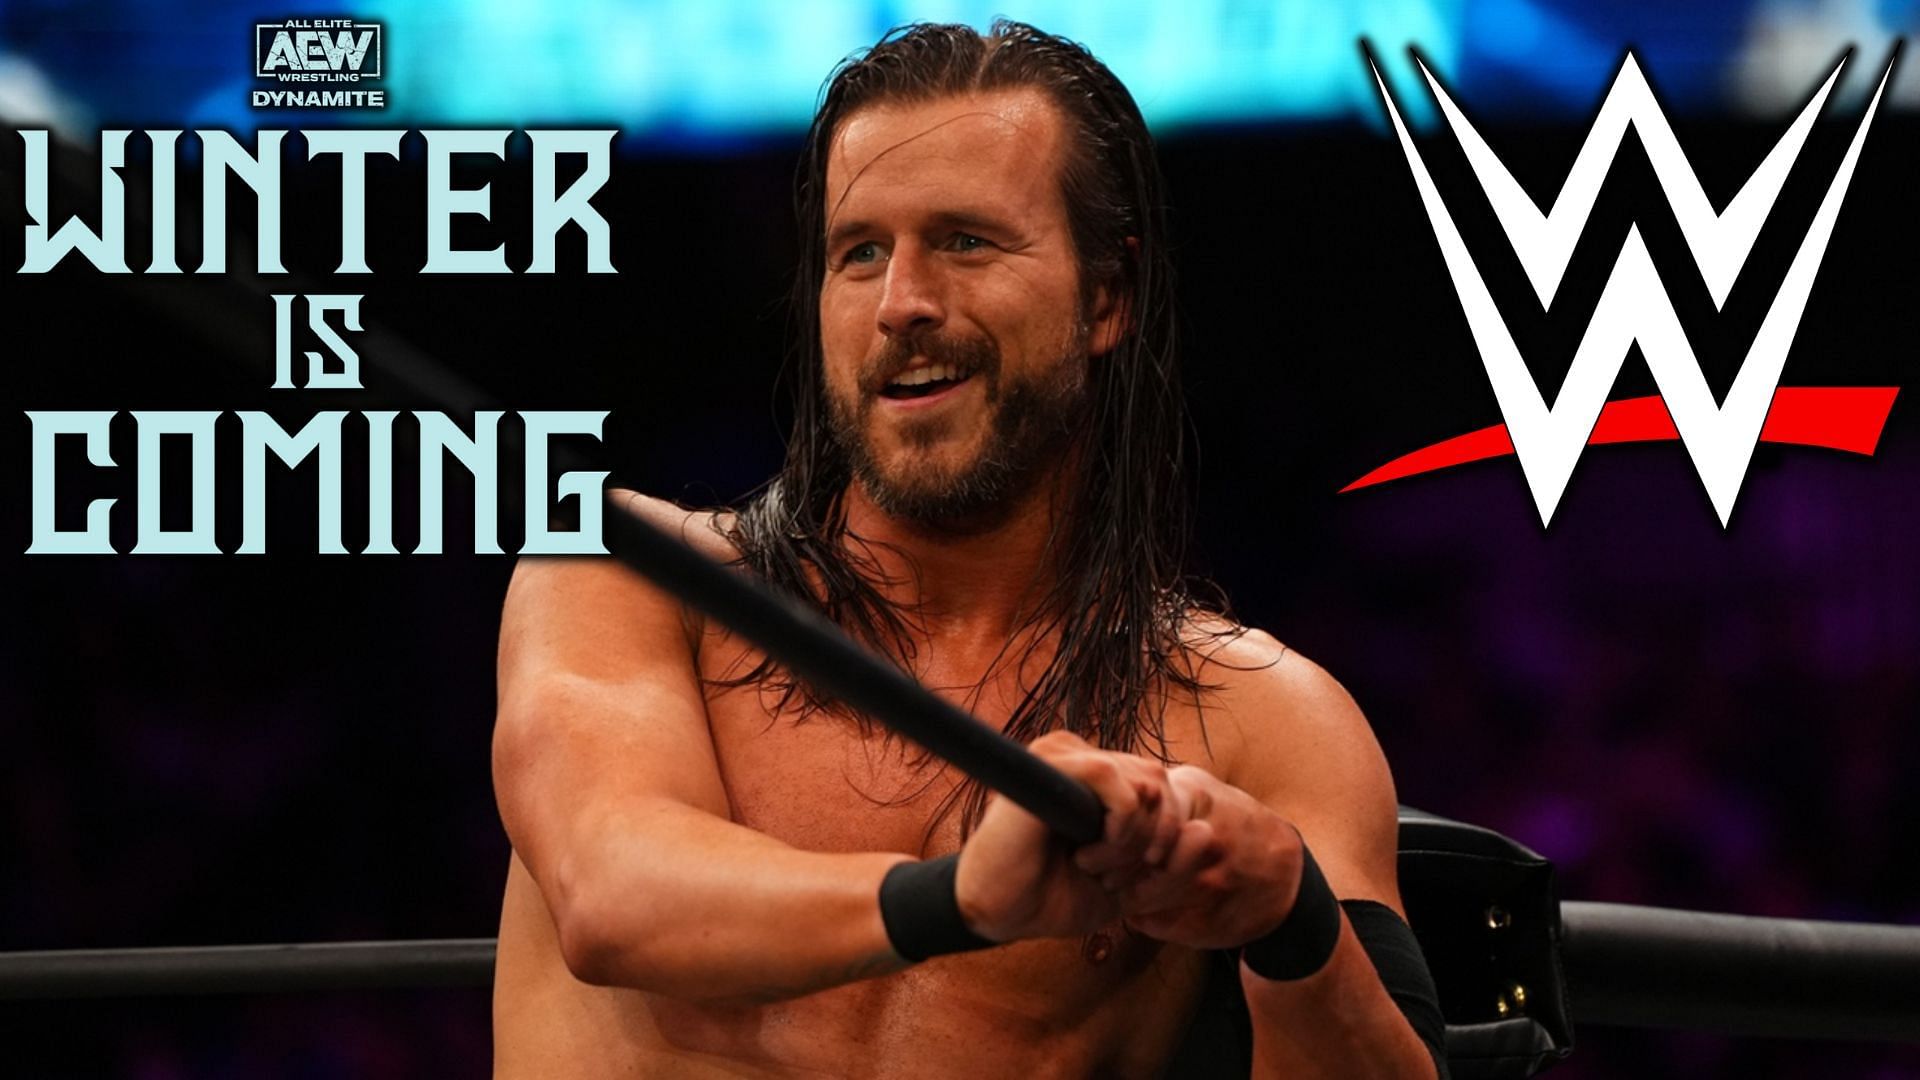 Could Adam Cole make his much anticipated return at AEW: Winter is Coming?